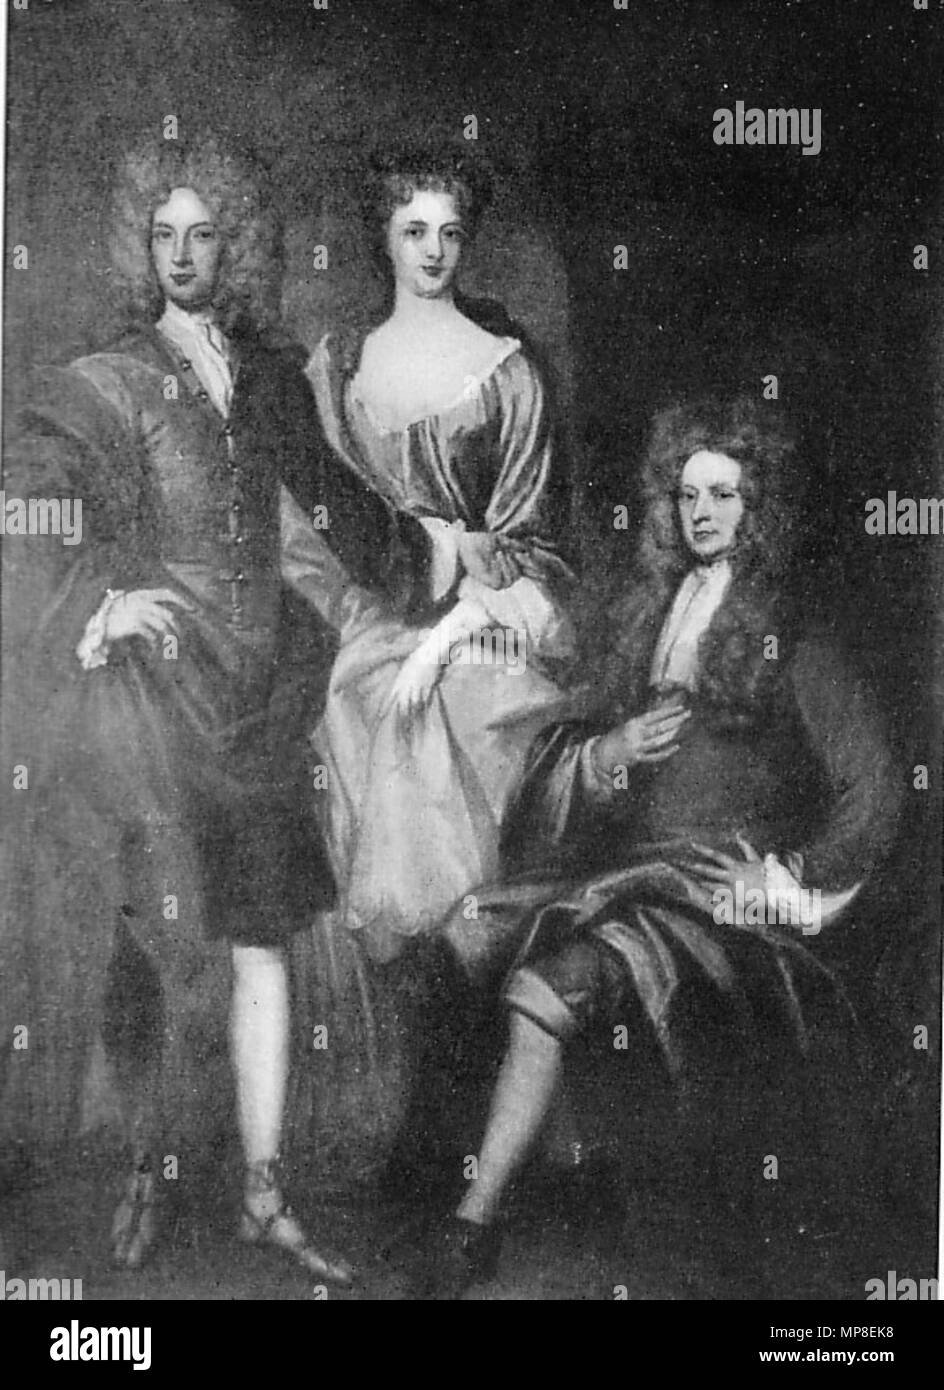 . Portrait of George Gordon, 1st Duke of Gordon and family. Seated, George Gordon, standing Lady Jean Gordon (later Jean Drummond, Duchess of Perth), and Alexander Gordon, Marquess of Huntly (later 2nd Duke of Gordon) . circa 1694-1706.   731 John Baptist Medina - George Gordon, 1st Duke of Gordon, and family Stock Photo